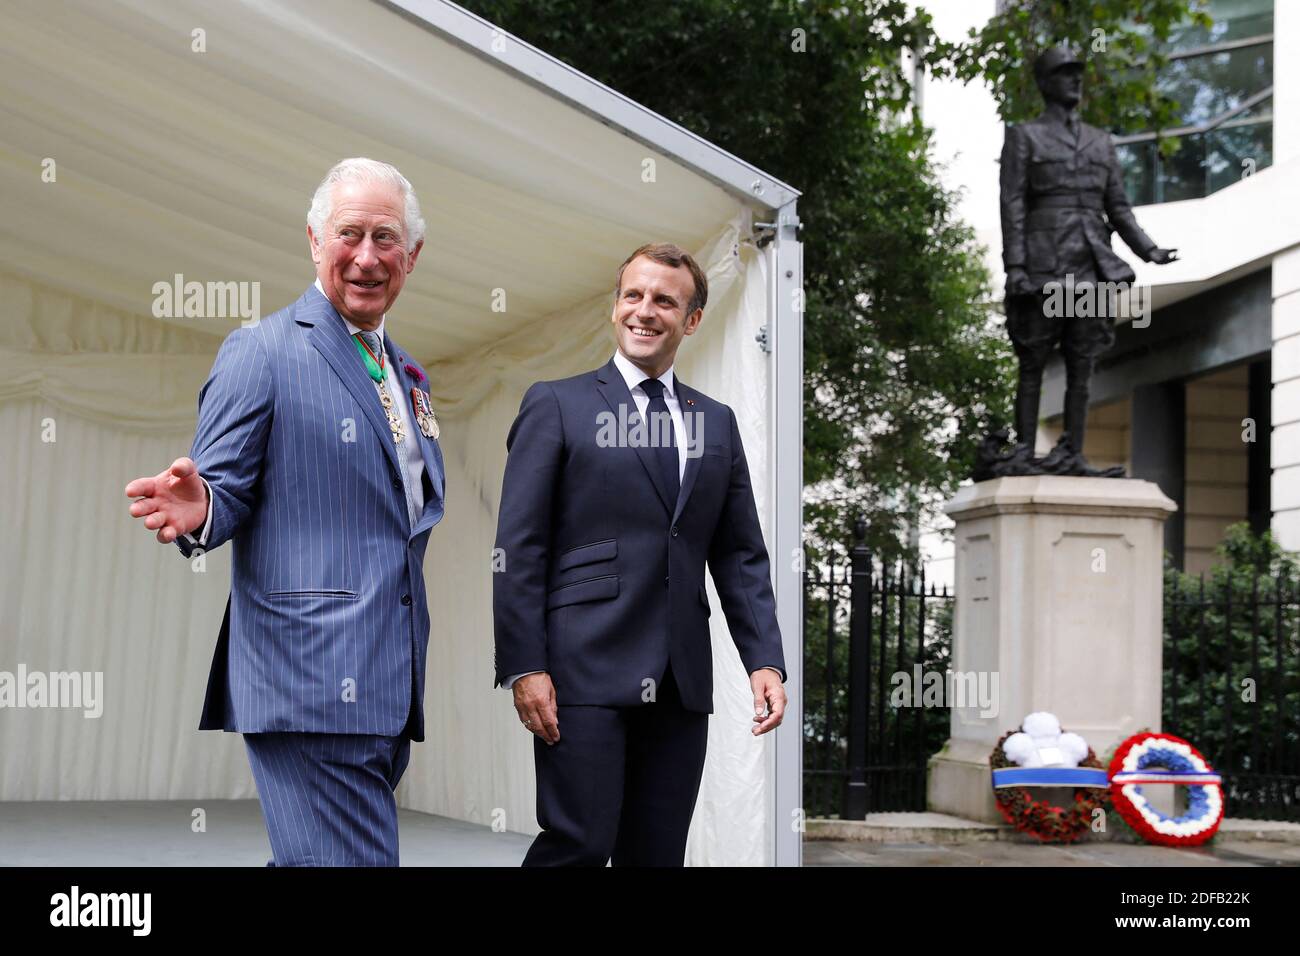 Britain's Prince Charles, Prince of Wales (L) and French President Emmanuel Macron (R) leave after a ceremony to lay wreaths at the statue of former French president Charles de Gaulle at Carlton Gardens in central London on June 18, 2020 during a visit to mark the anniversary of former de Gaulle's appeal to French people to resist the Nazi occupation. - Macron visited London on June 18 to commemorate the 80th anniversary of former French president Charles de Gaulle's appeal to French people to resist the Nazi occupation during World War II. Photo by Tolga AKMEN/Pool/ABACAPRESS.COM Stock Photo